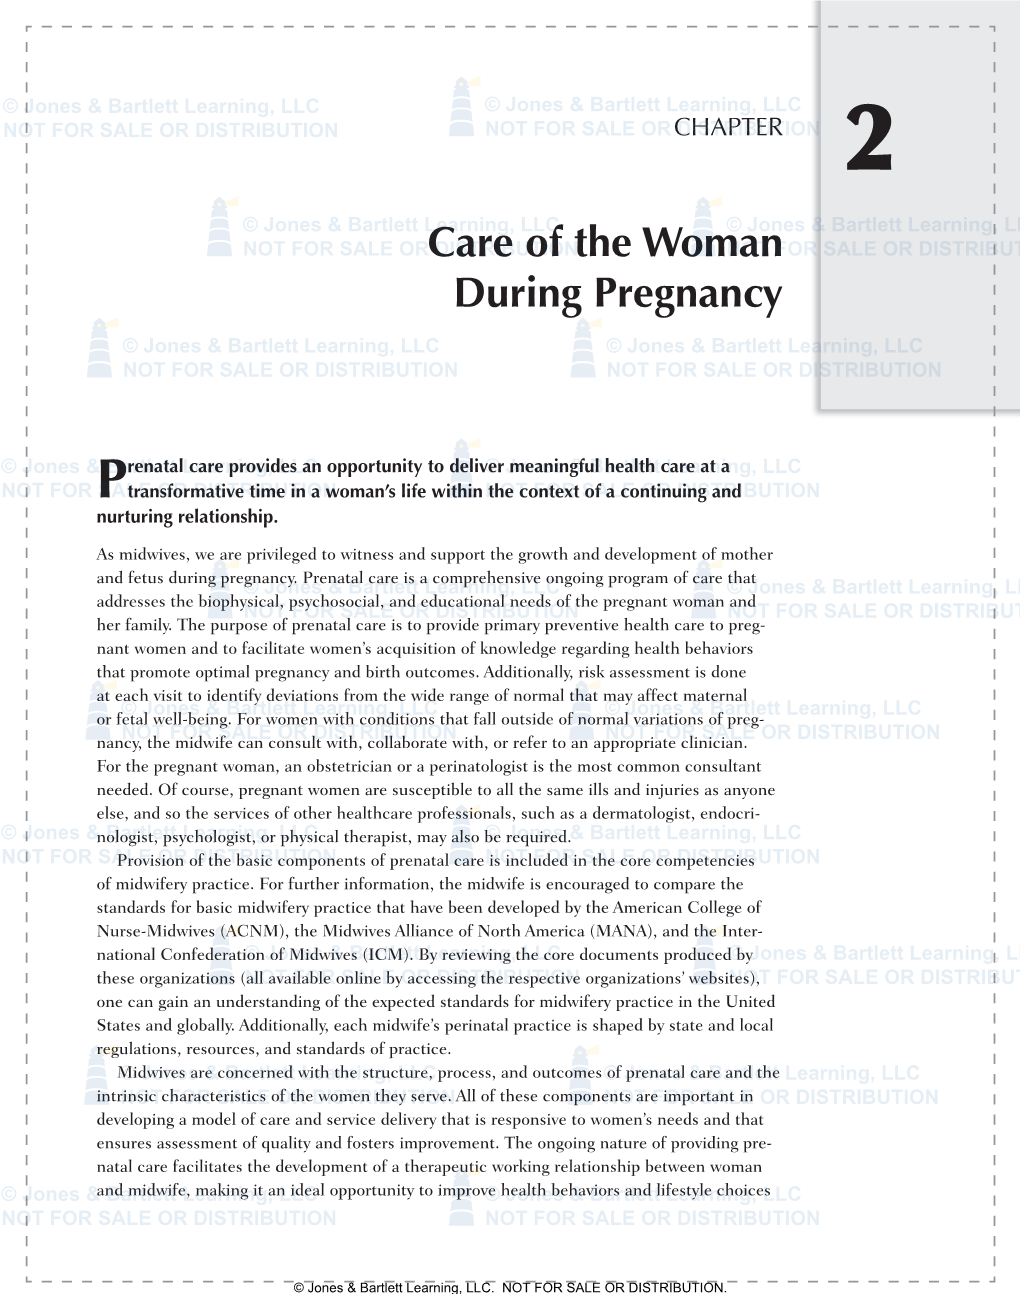 Care of the Woman During Pregnancy